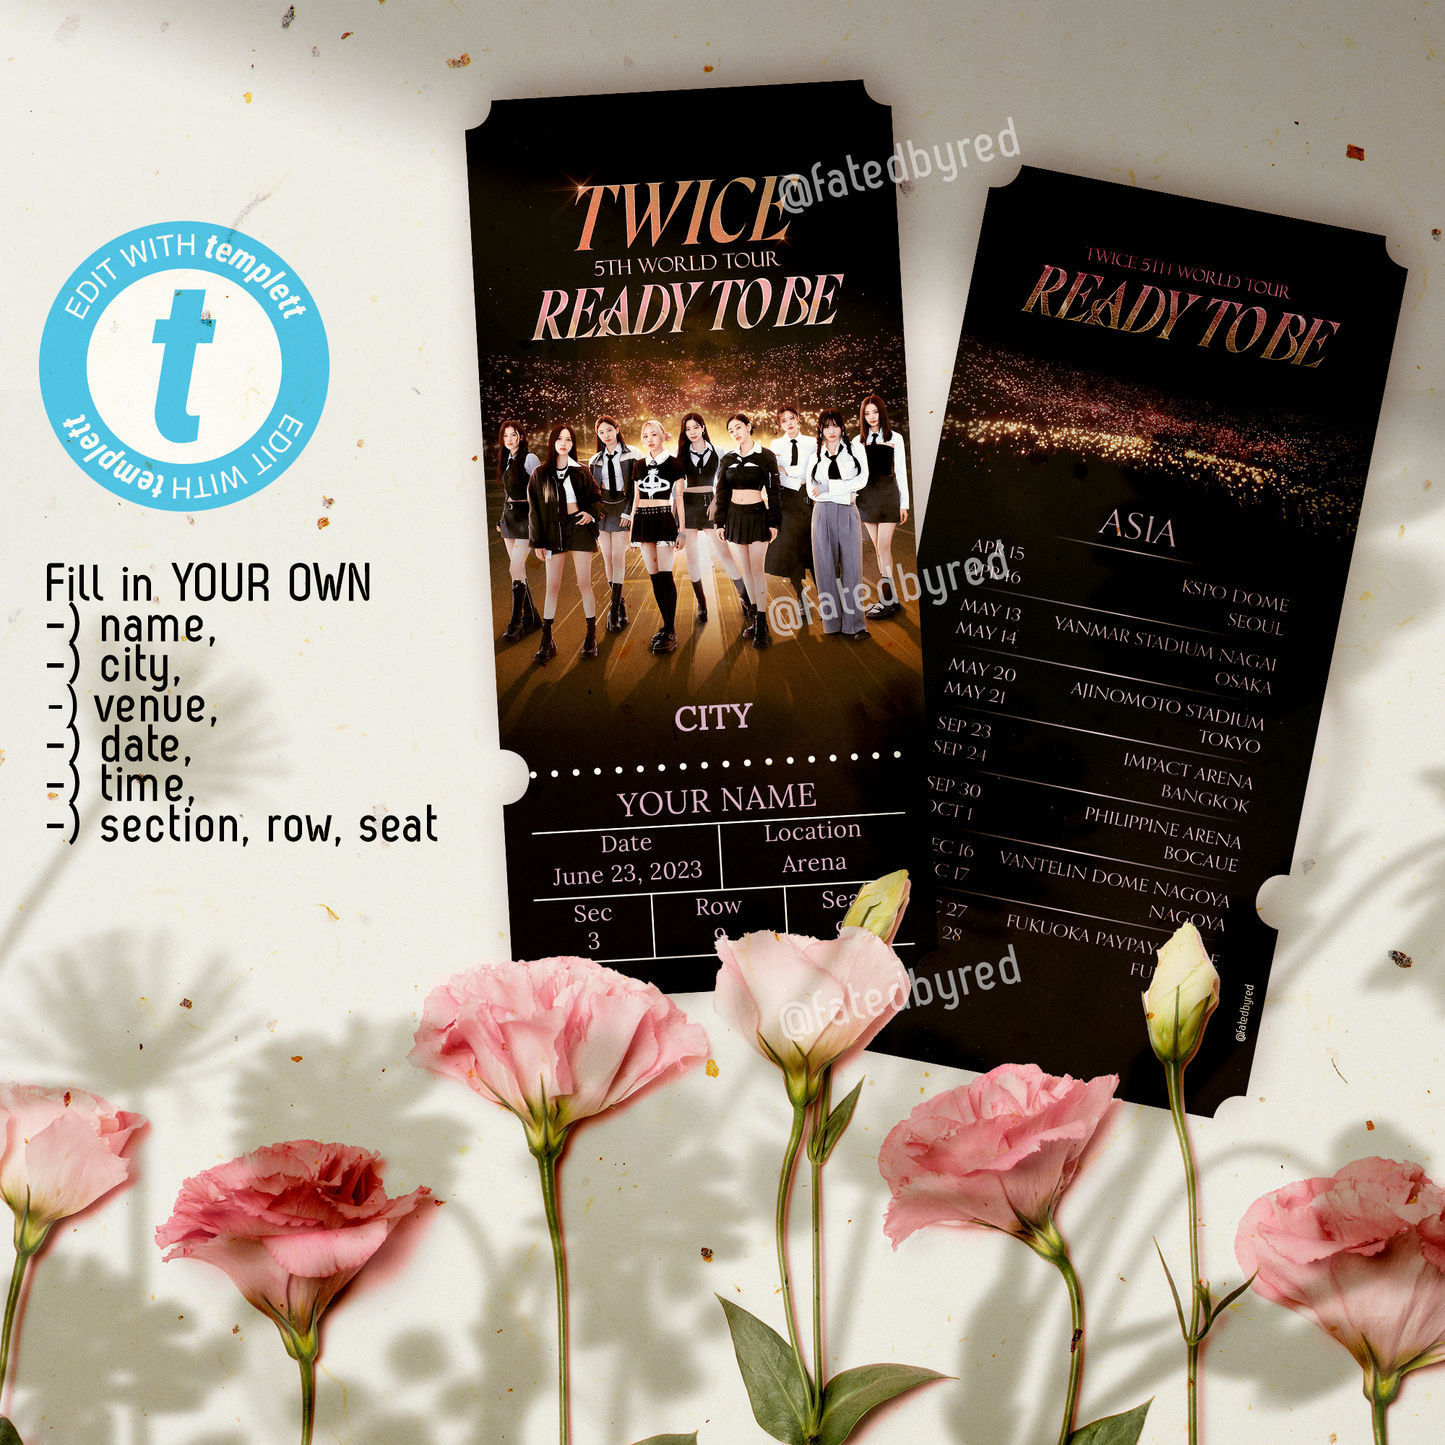 EDITABLE TWICE digital TICKET Ready To Be TOUR print at home